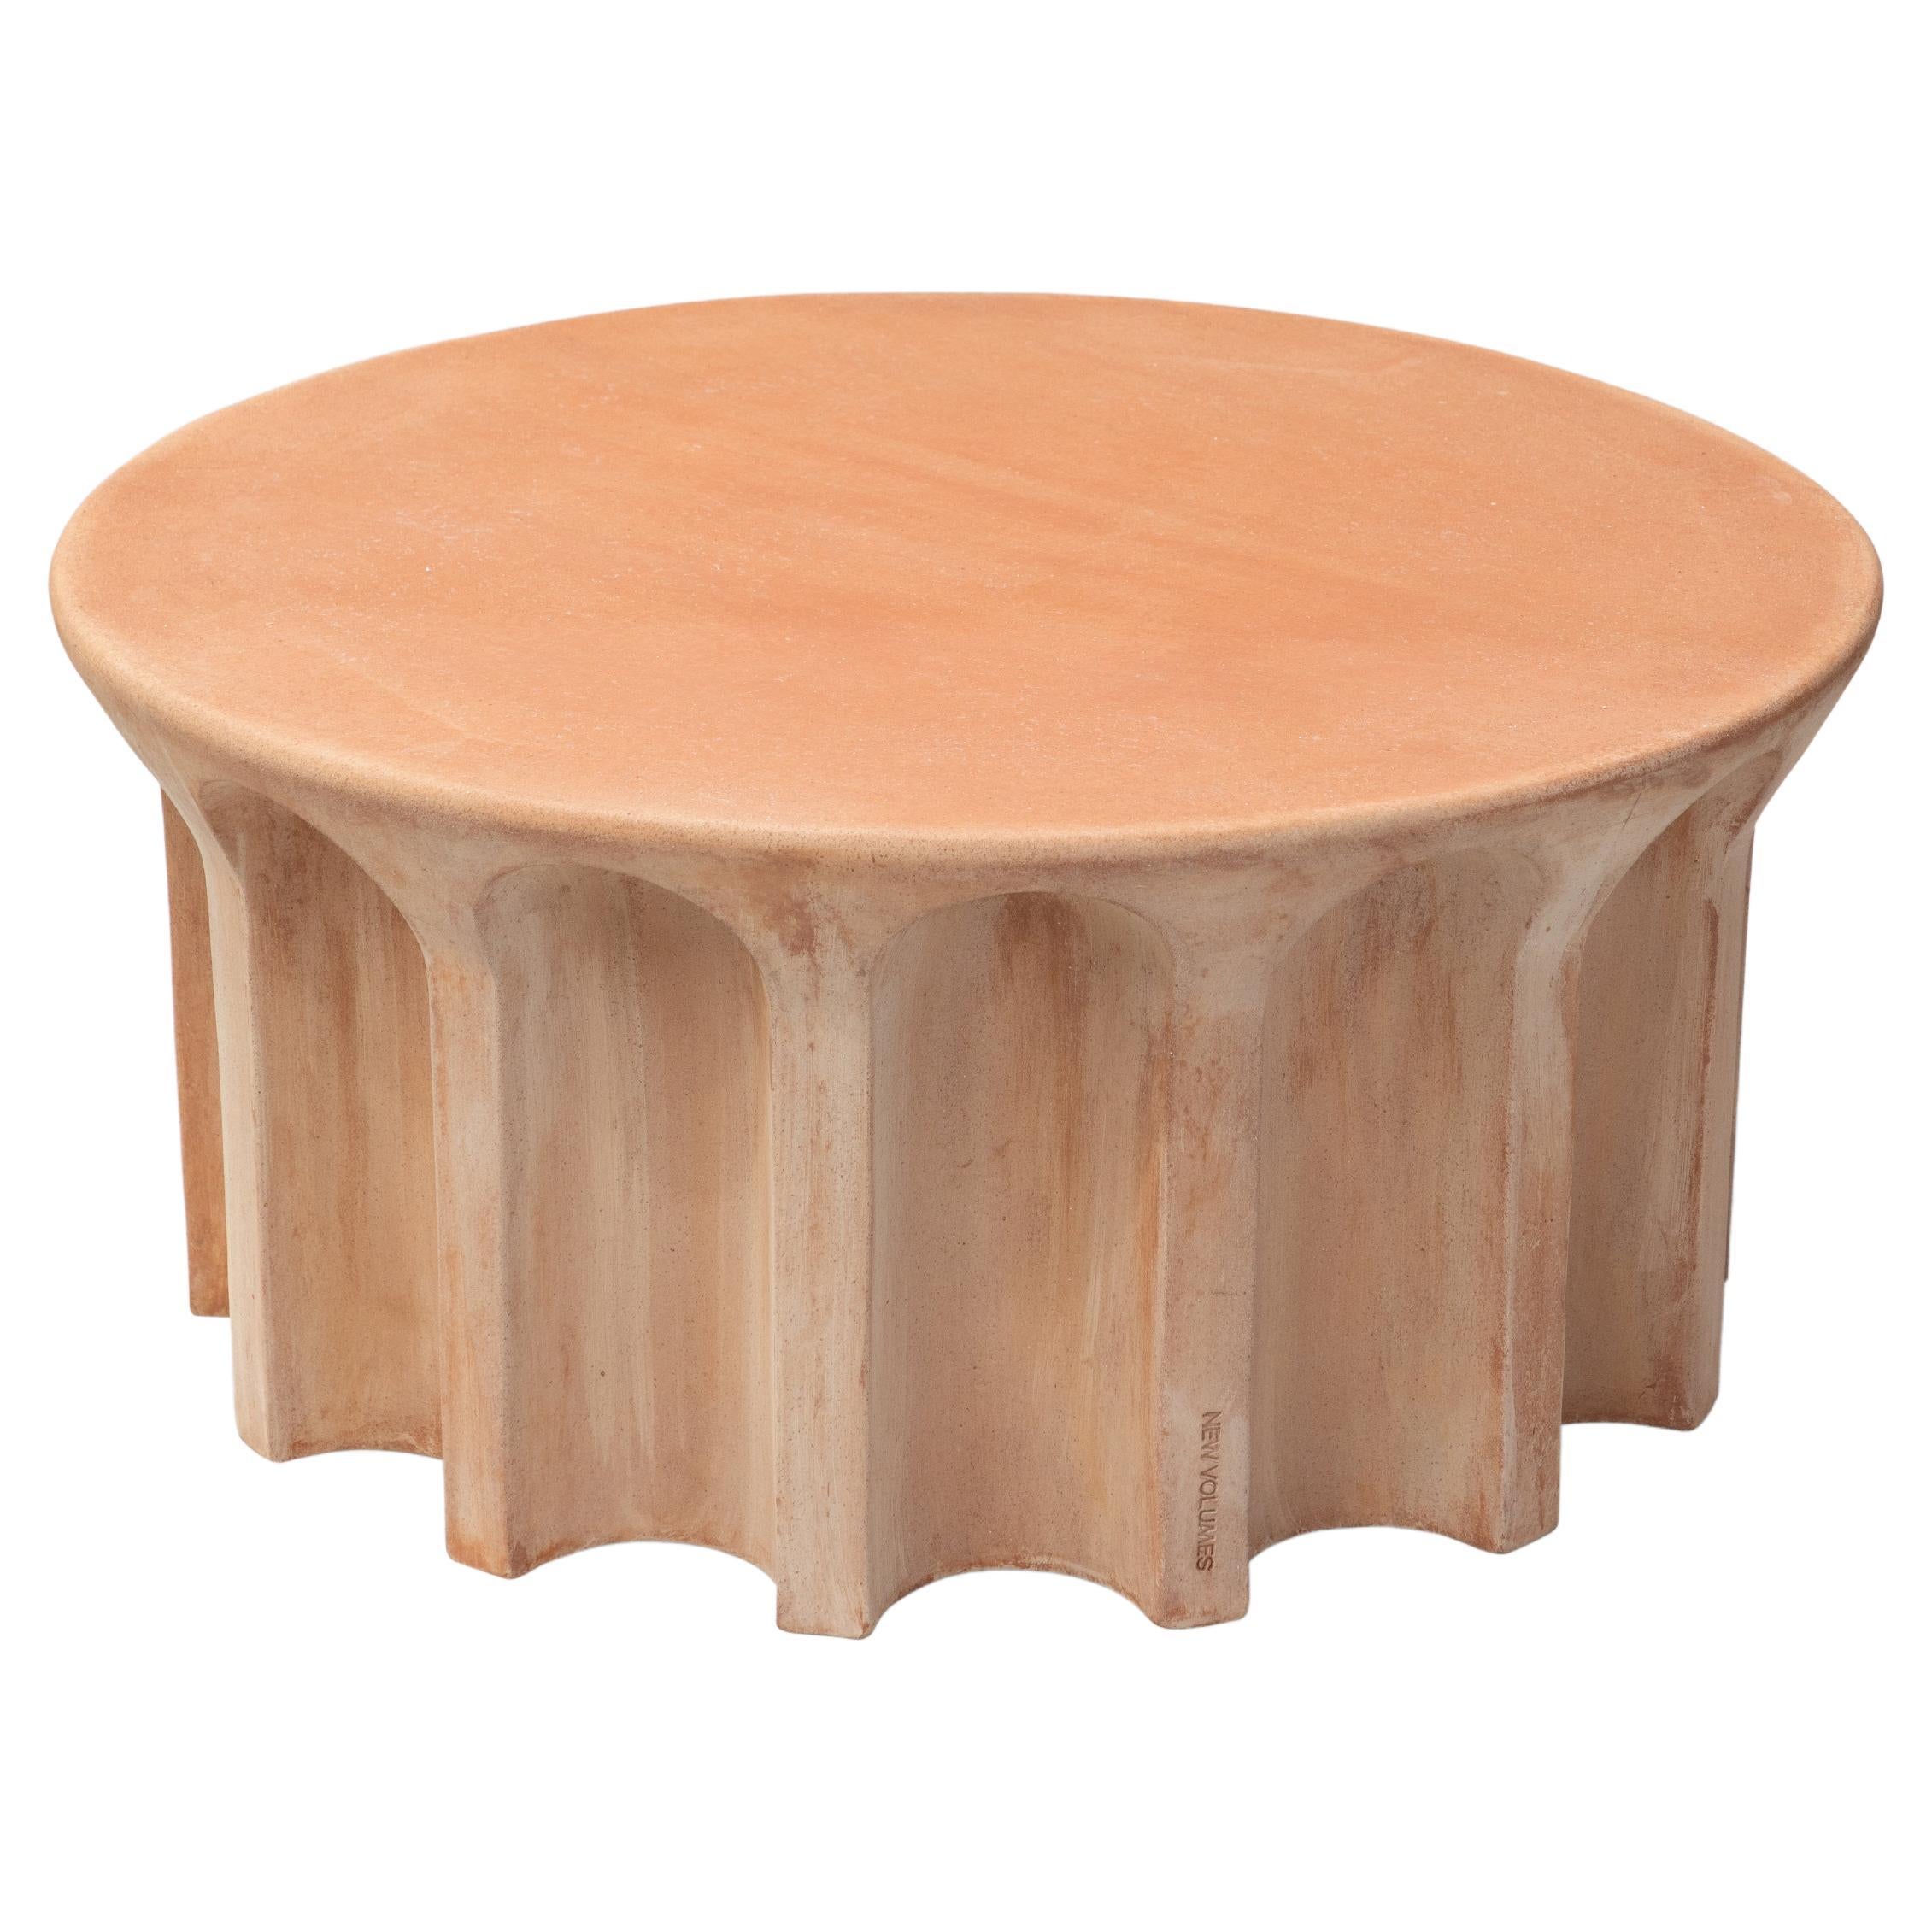 New Volumes Terracotta Echo Low Table by Thomas Coward For Sale